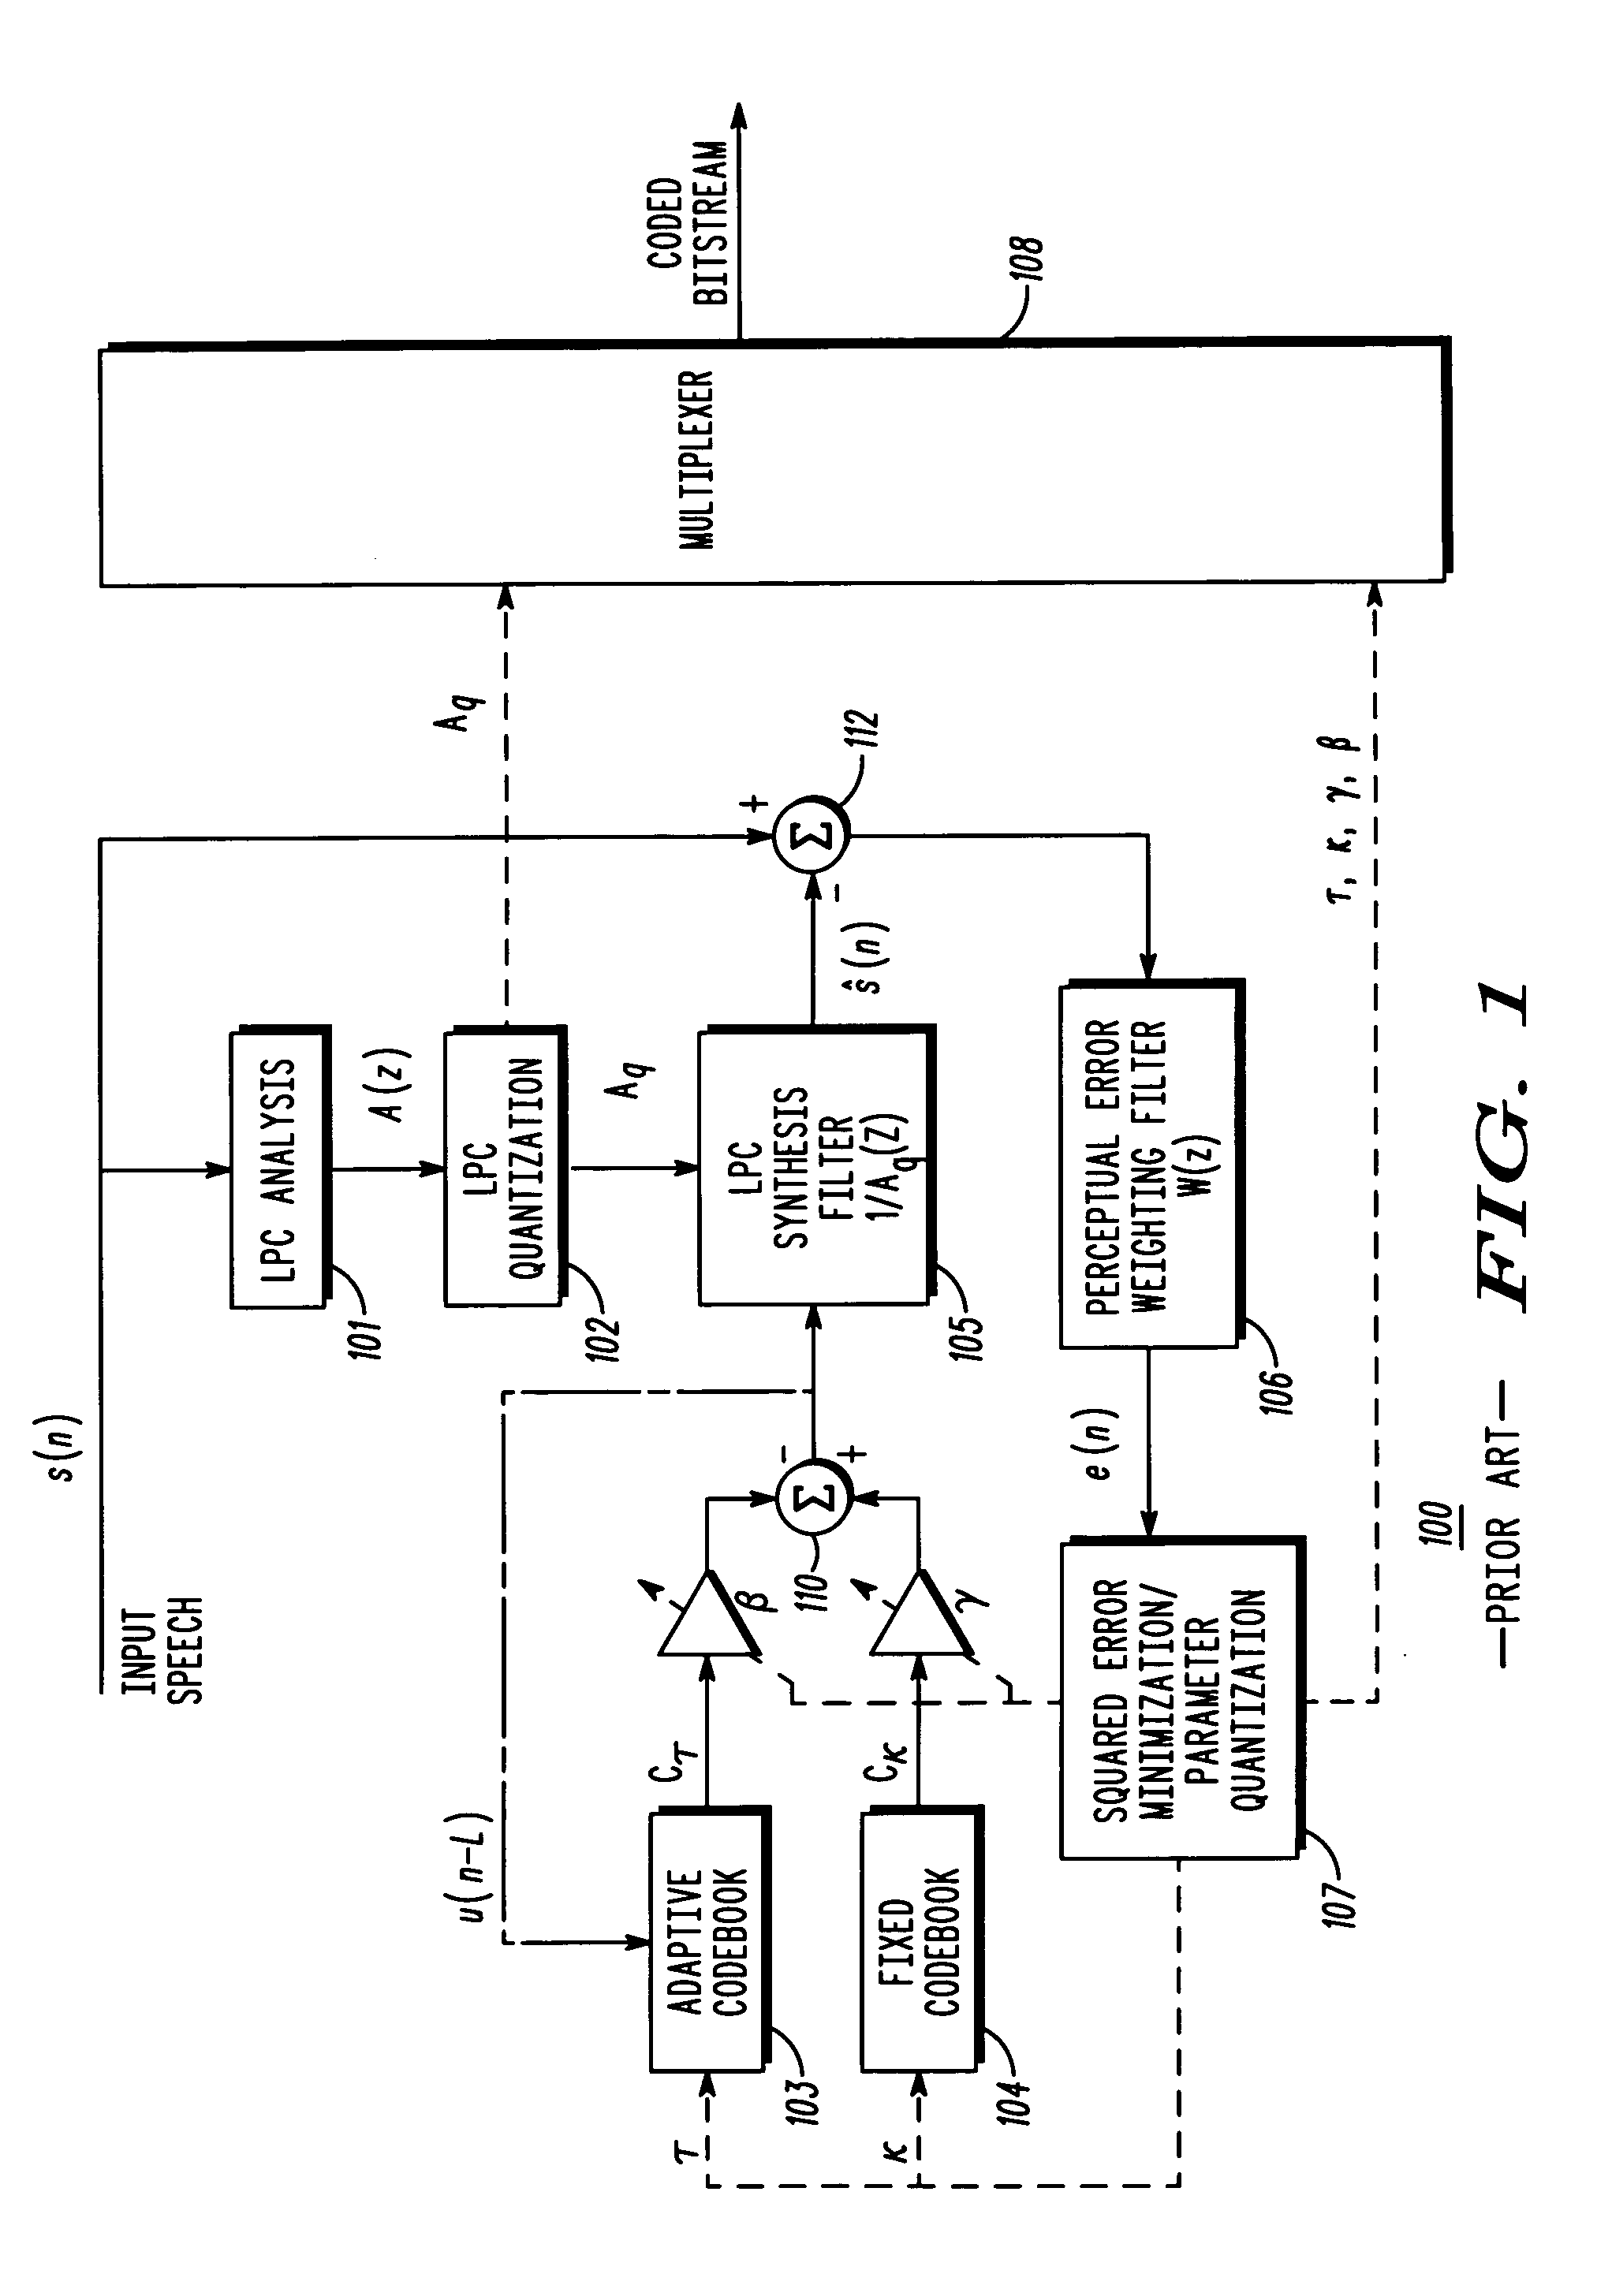 Method and apparatus for performing harmonic noise weighting in digital speech coders